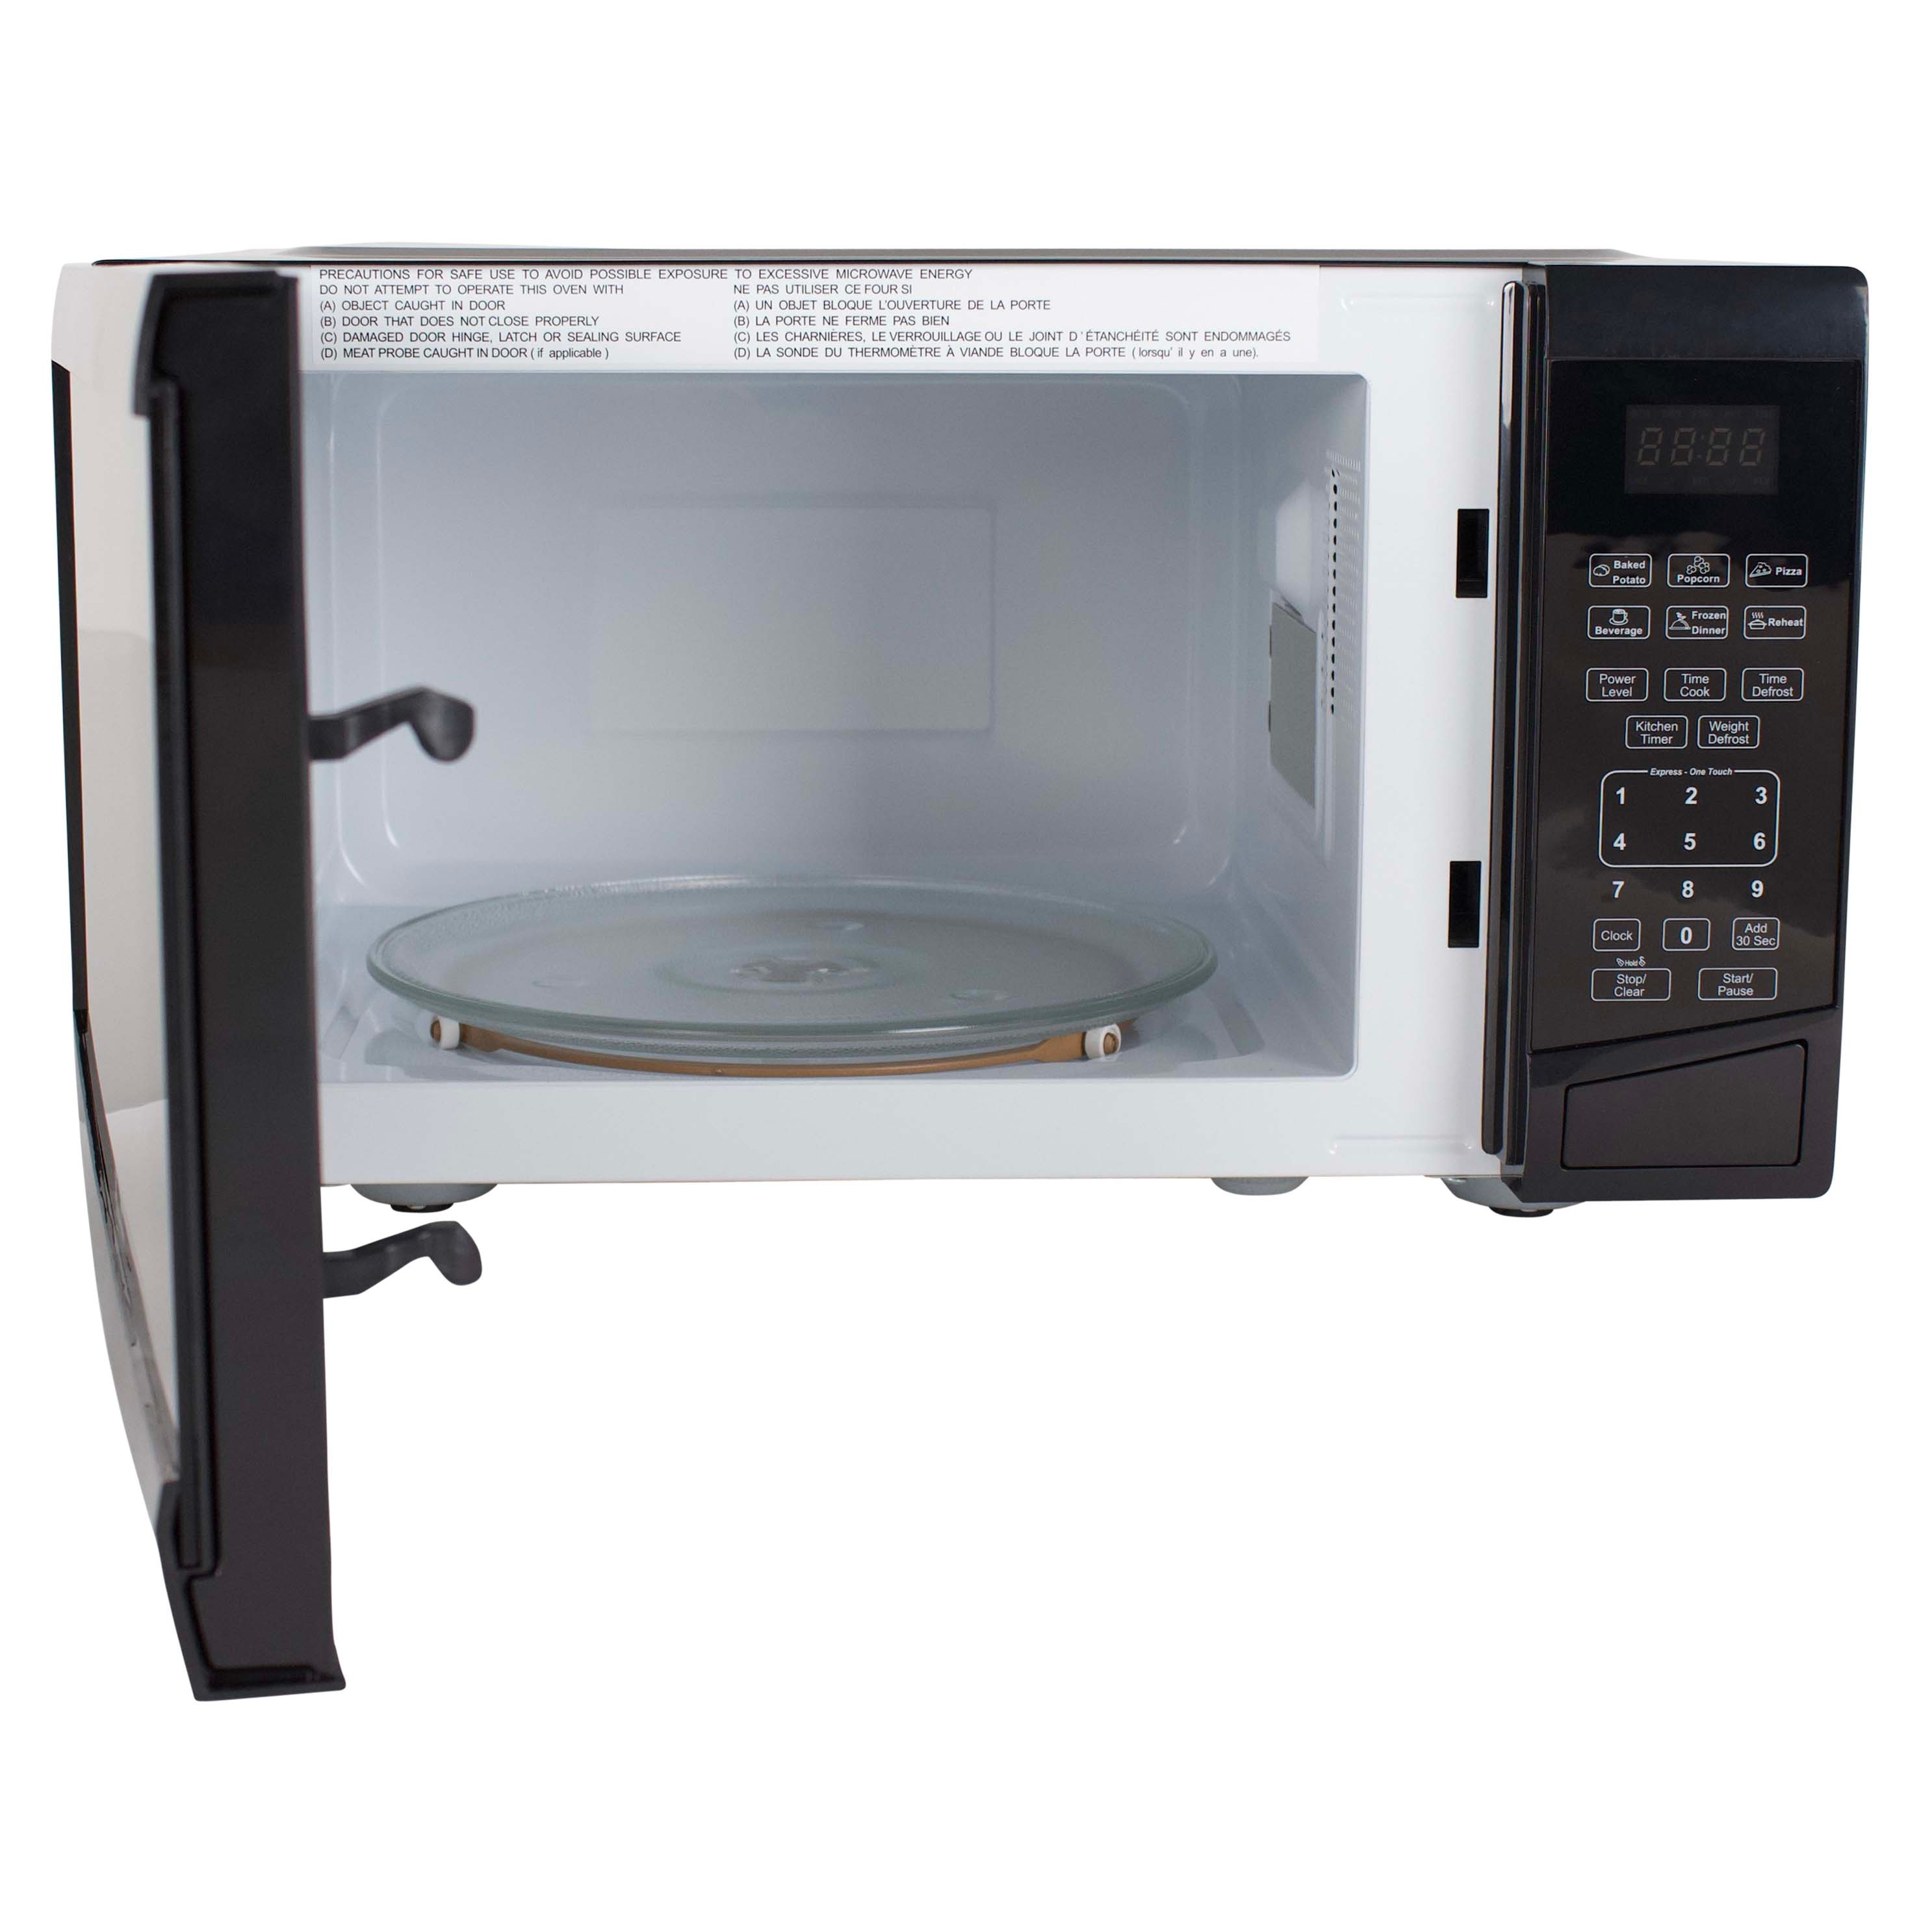 MT9K3S 0.9 Cubic Foot Microwave Oven by Avanti Products AVAMT9K3S